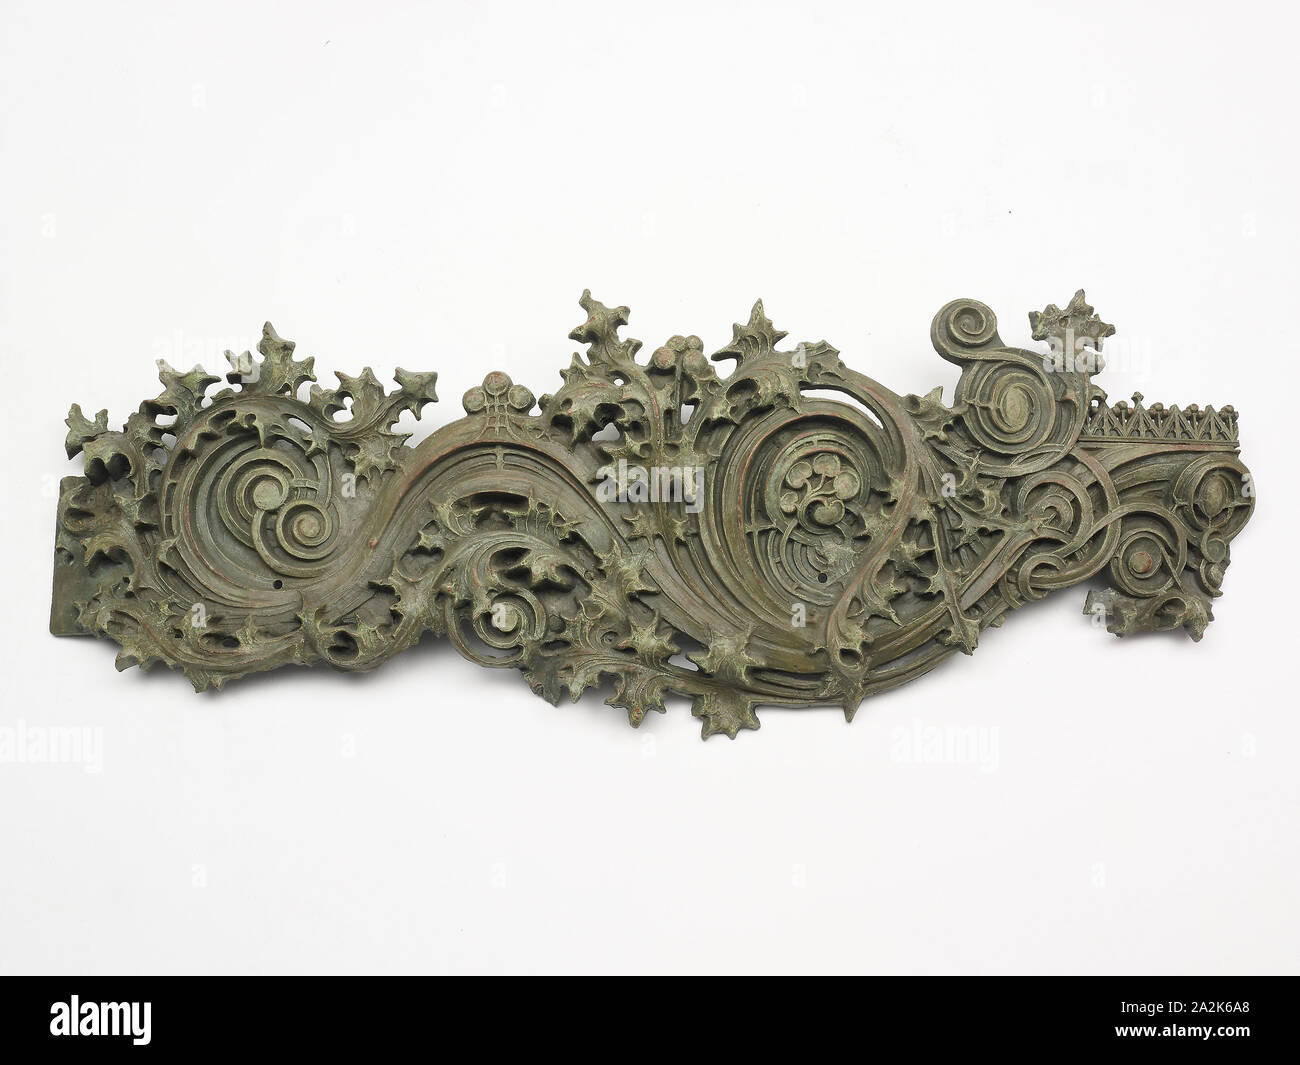 Gage Building: Horizontal Ornament from the Facade, 1898–1899, Designer: Louis H. Sullivan (American, 1856-1924), Model by: Kristian Schneider (American, late 19th cen.), Cast by: Winslow Brothers Iron Works (American, late 19th Cen), Architect: Holabird & Roche, Michigan Avenue, 18 South, Cast iron, 45.8 × 126 × 16.5 cm Stock Photo